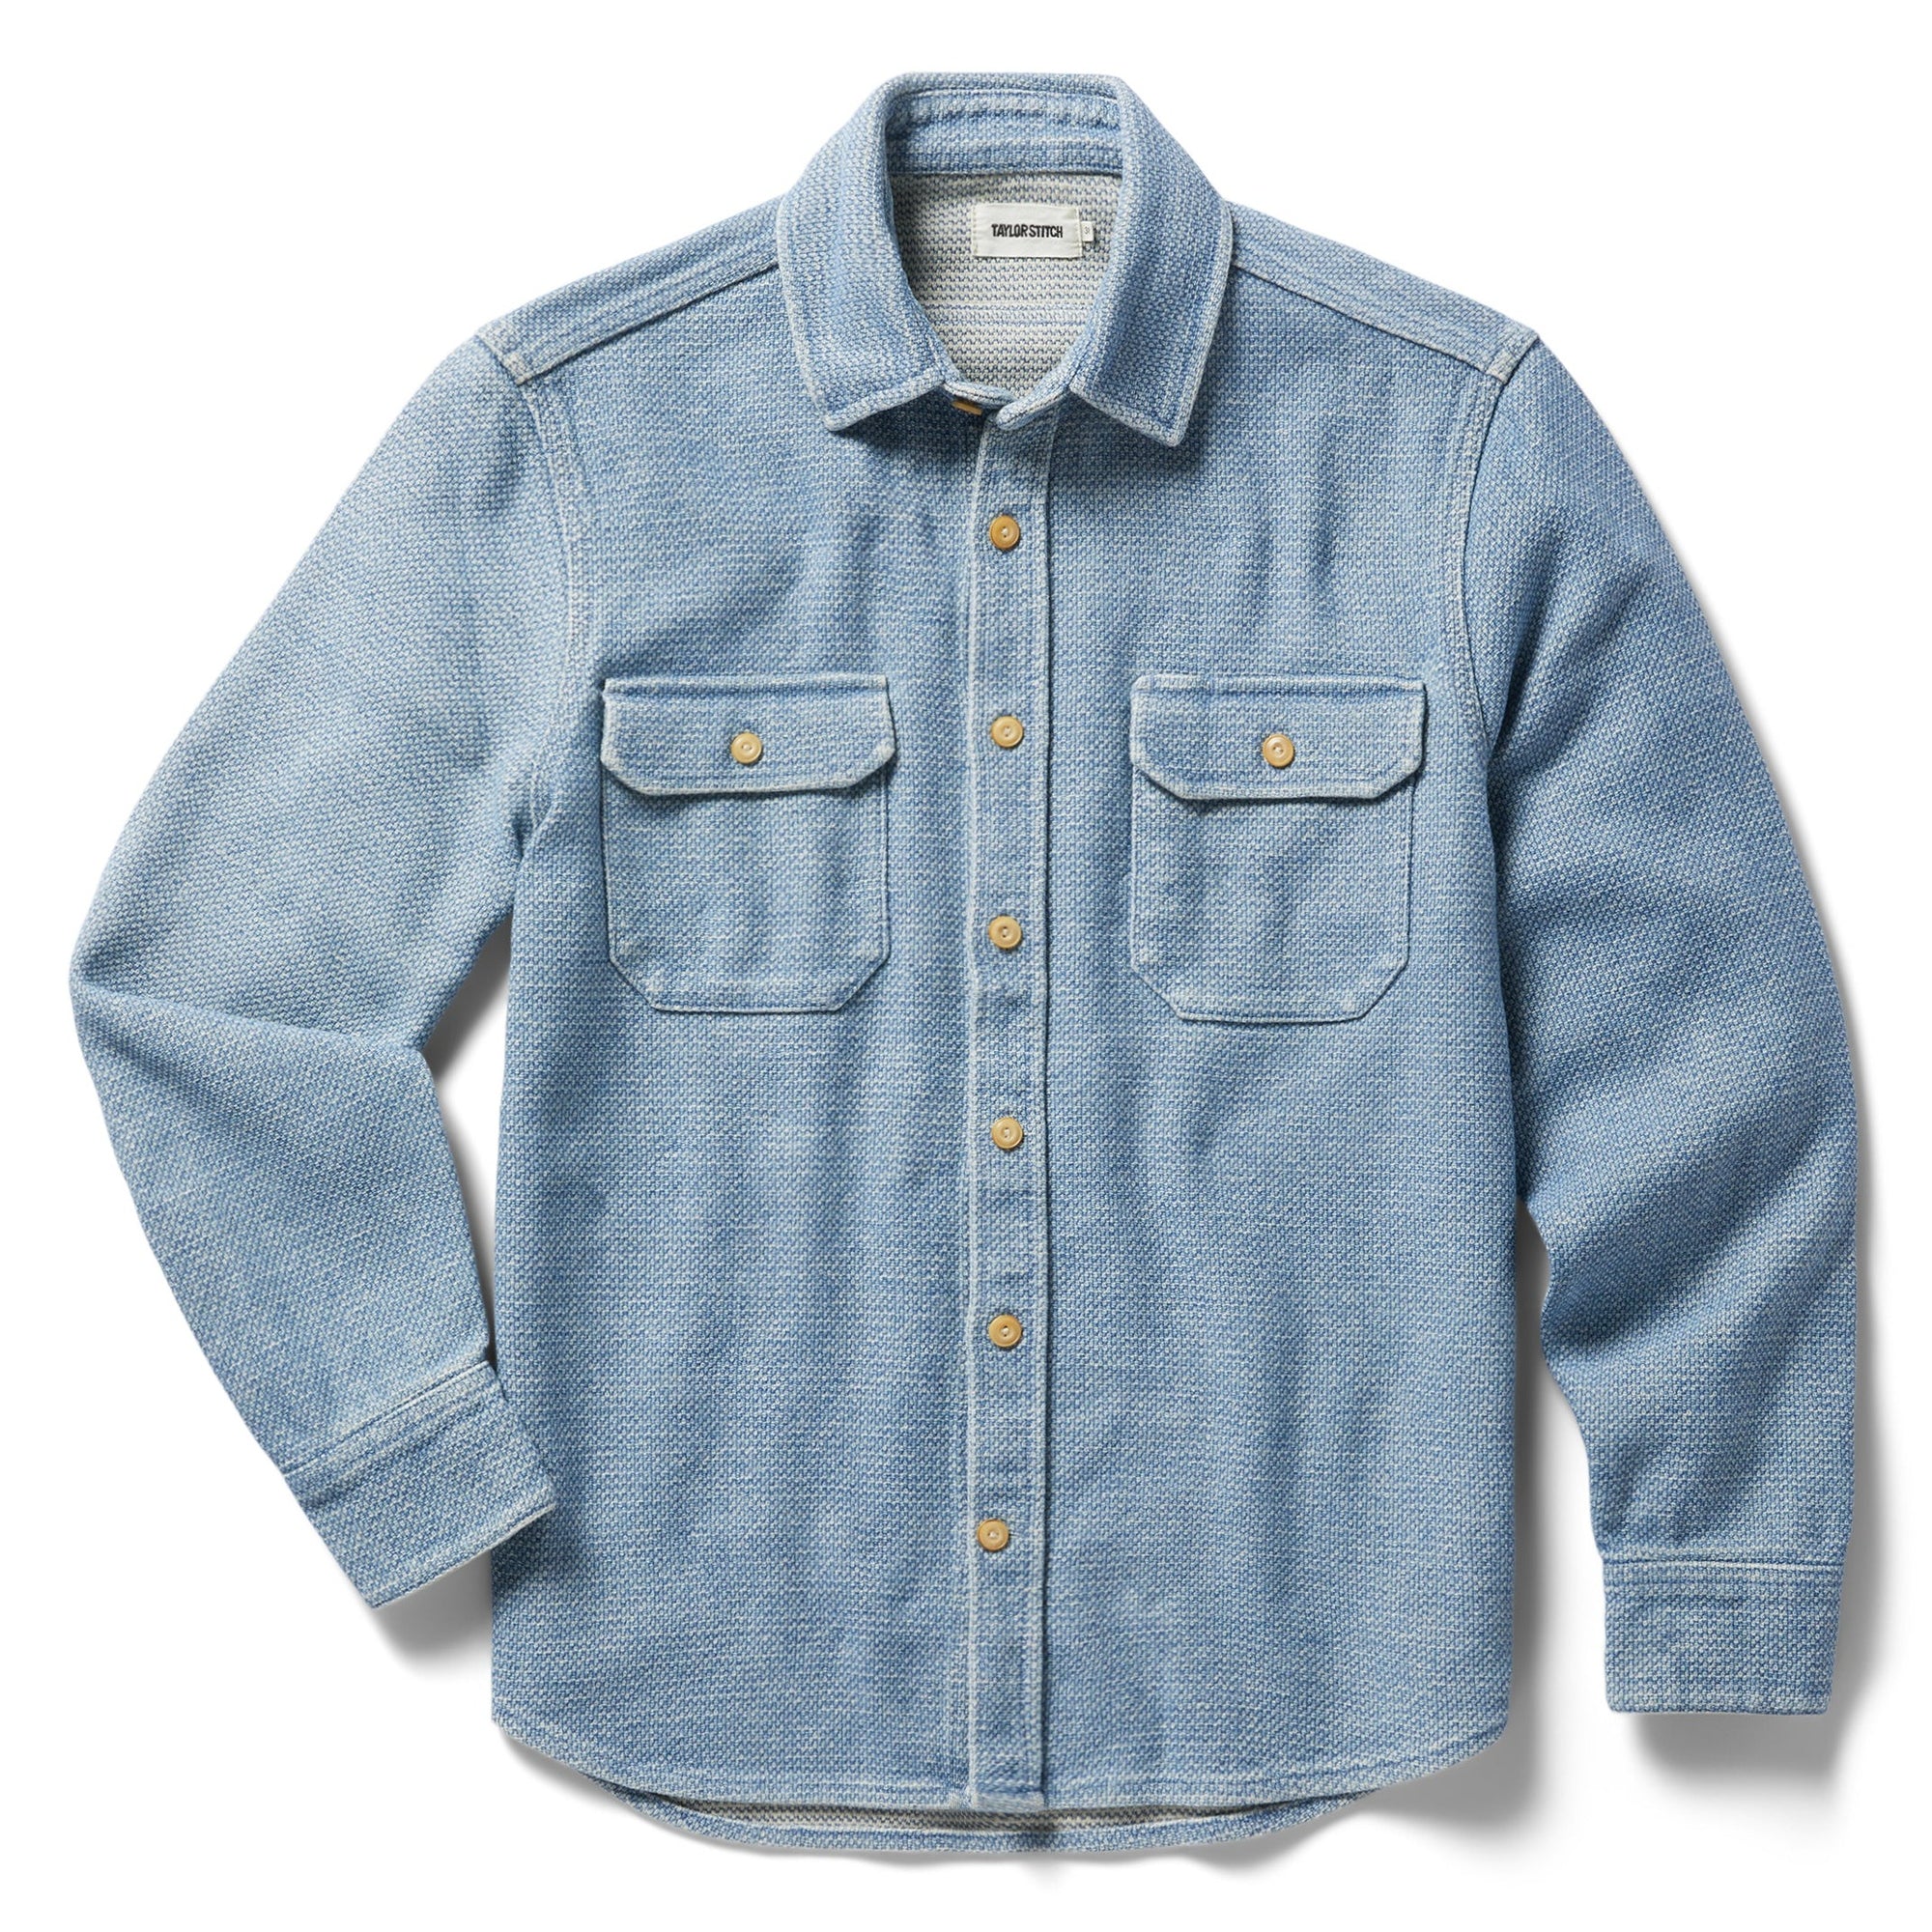 Taylor Stitch - The Division Shirt in Washed Indigo